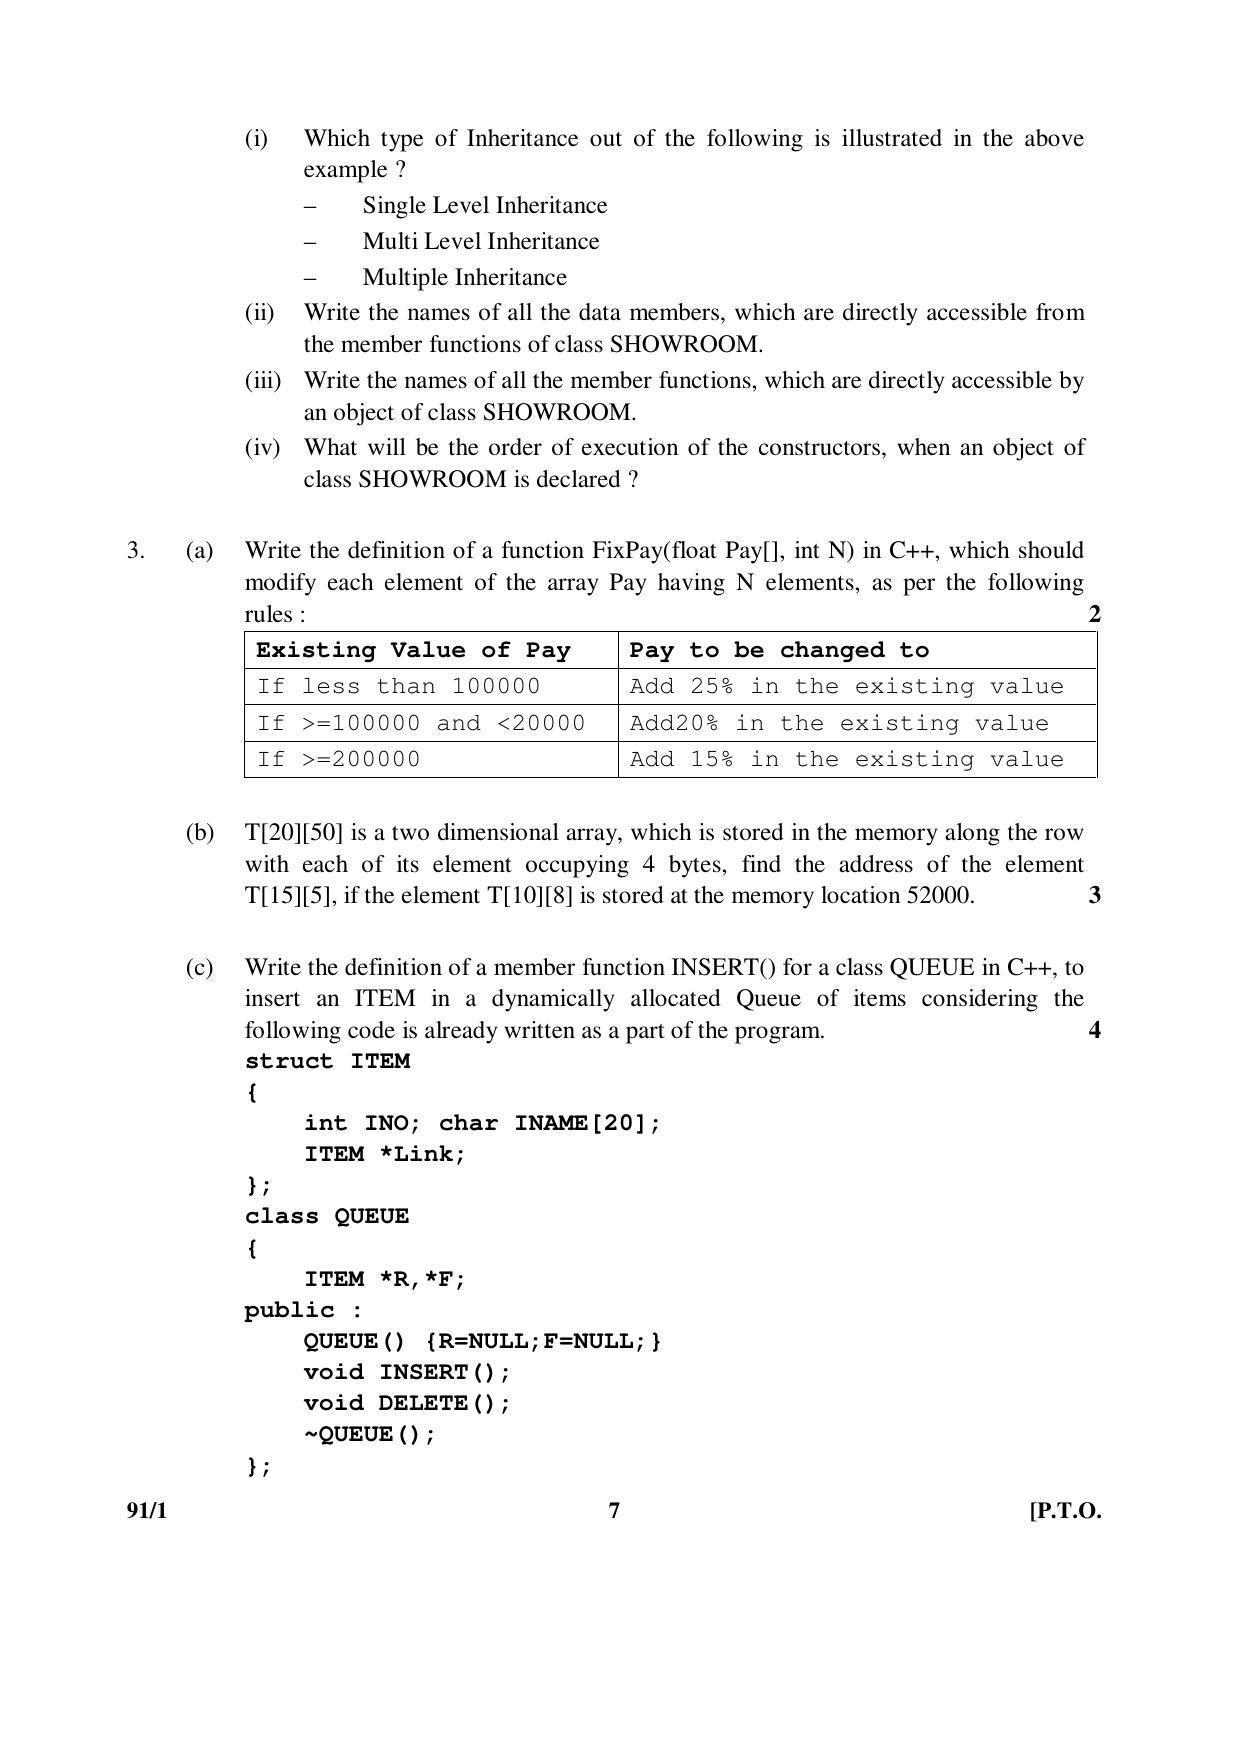 CBSE Class 12 91-1 COMPUTER SCIENCE 2016 Question Paper - Page 7